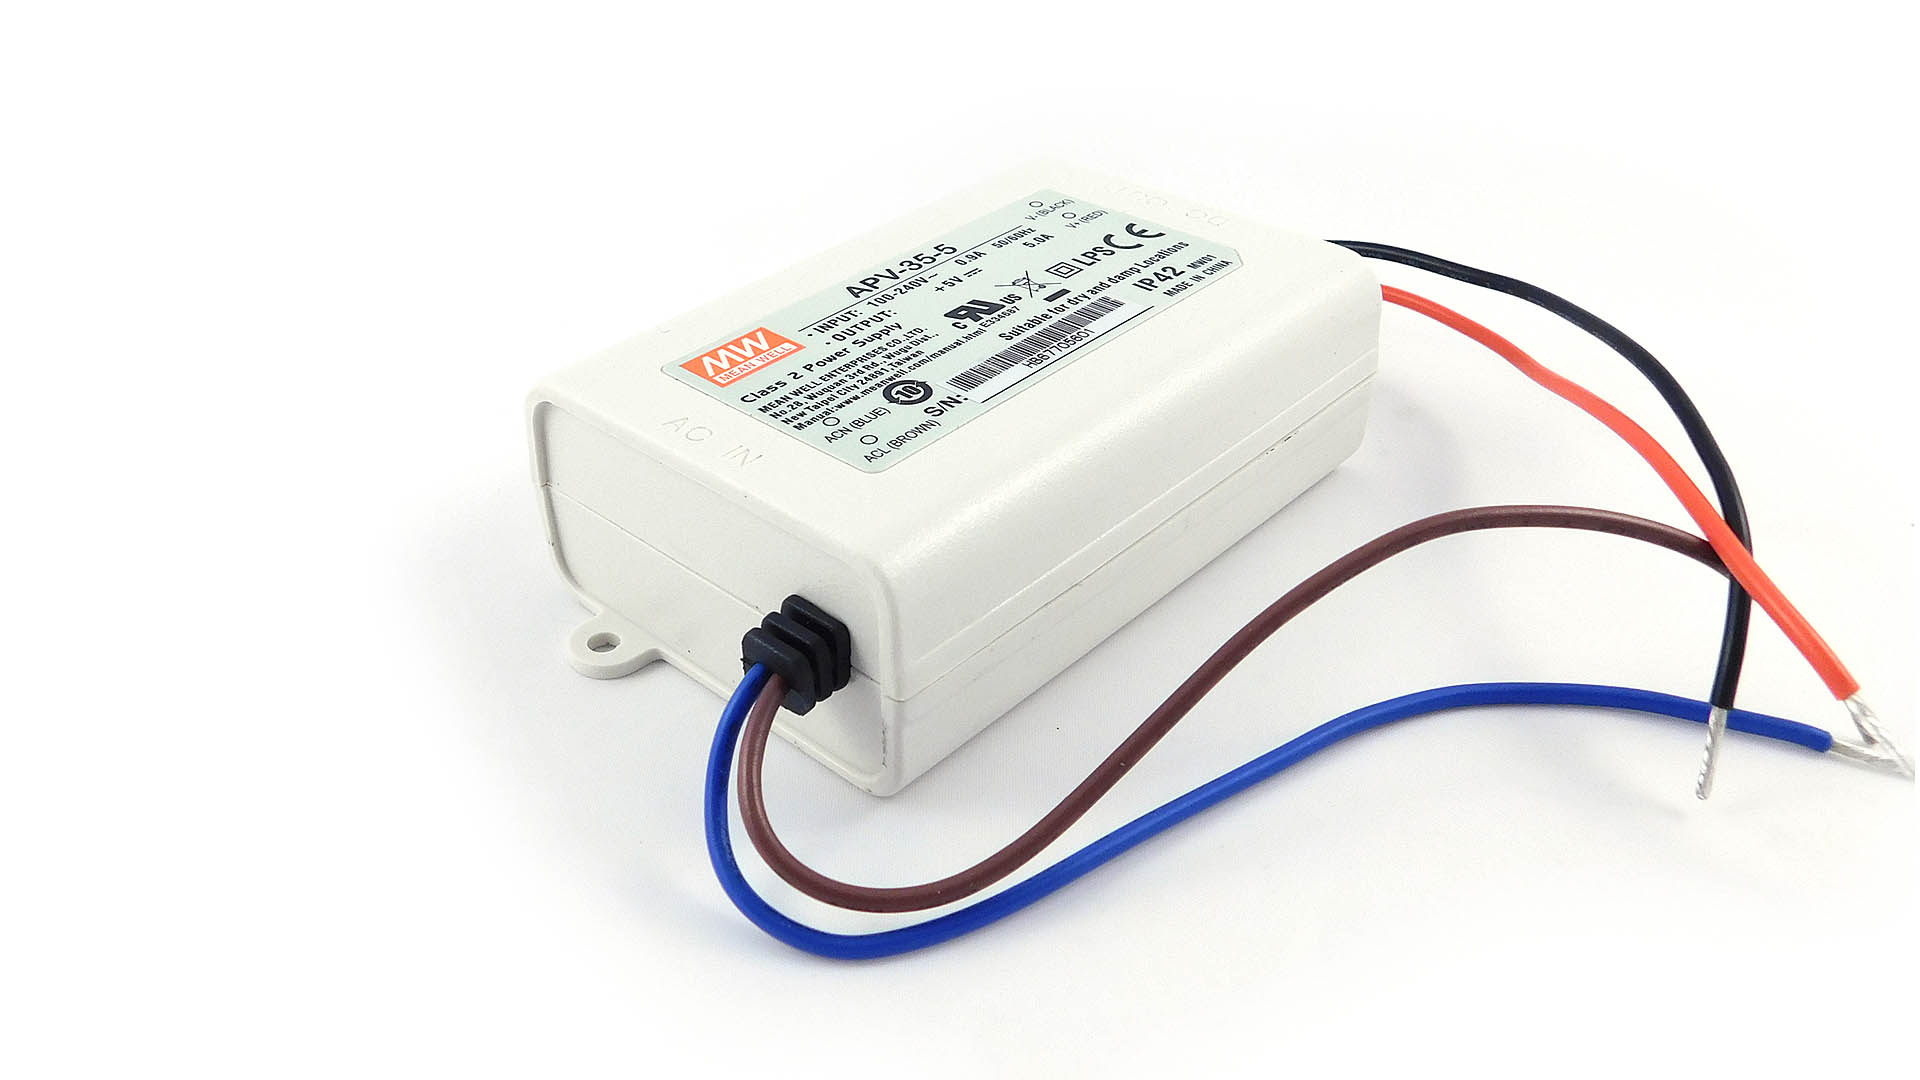 Details about   MeanWell APV-35-5 25W 5V 5A LED power supply 